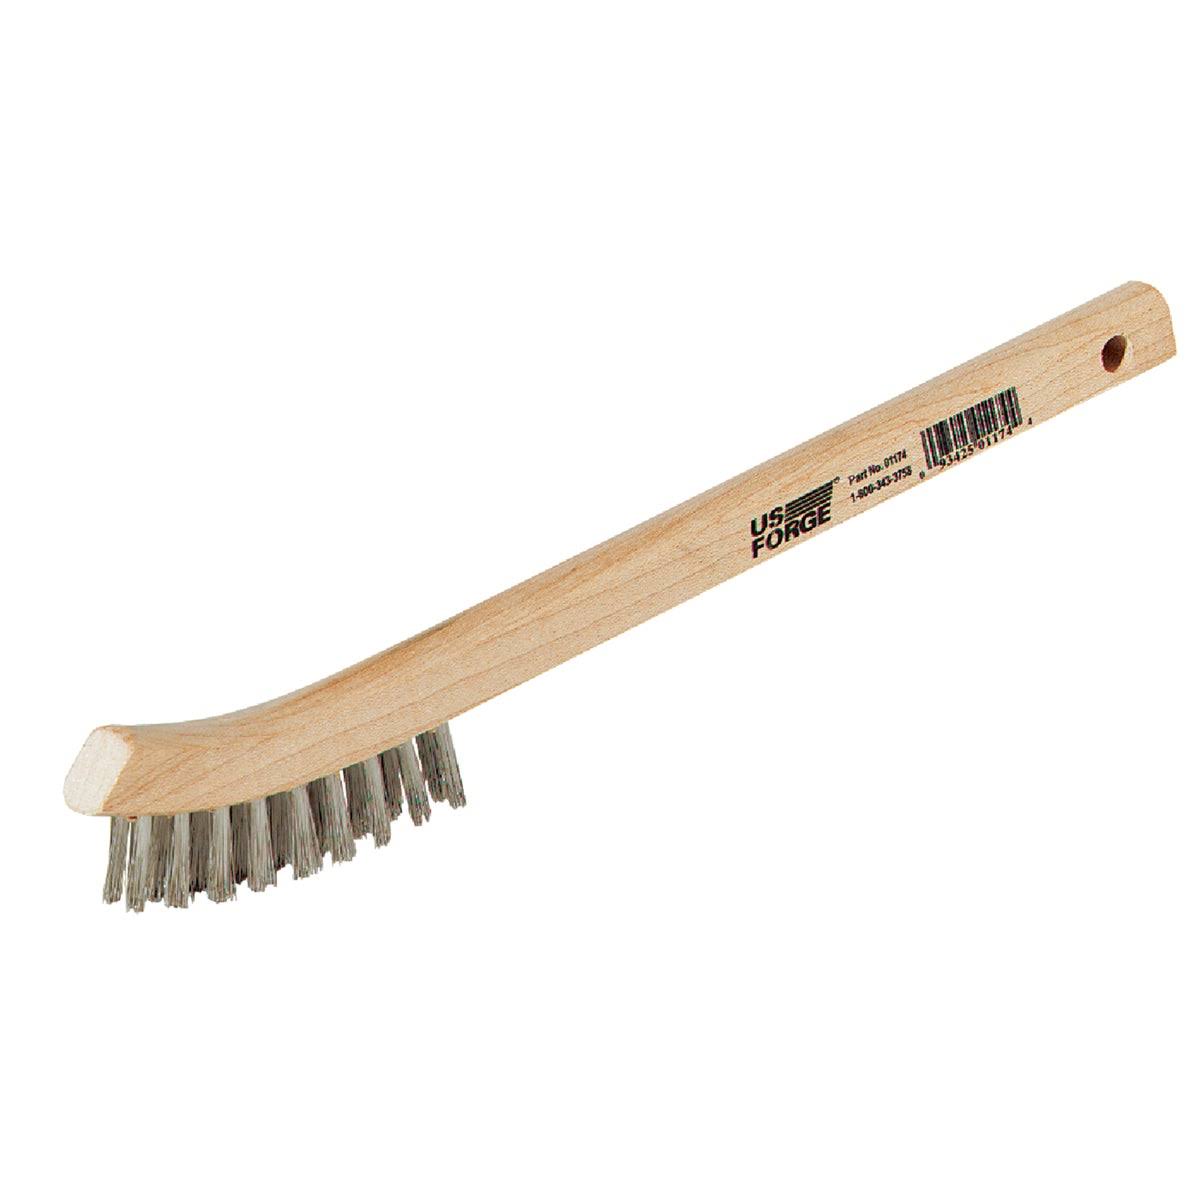 Forney Industries Wire Scratch Brush - Stainless Steel with Wood Handle, 7 3/4"